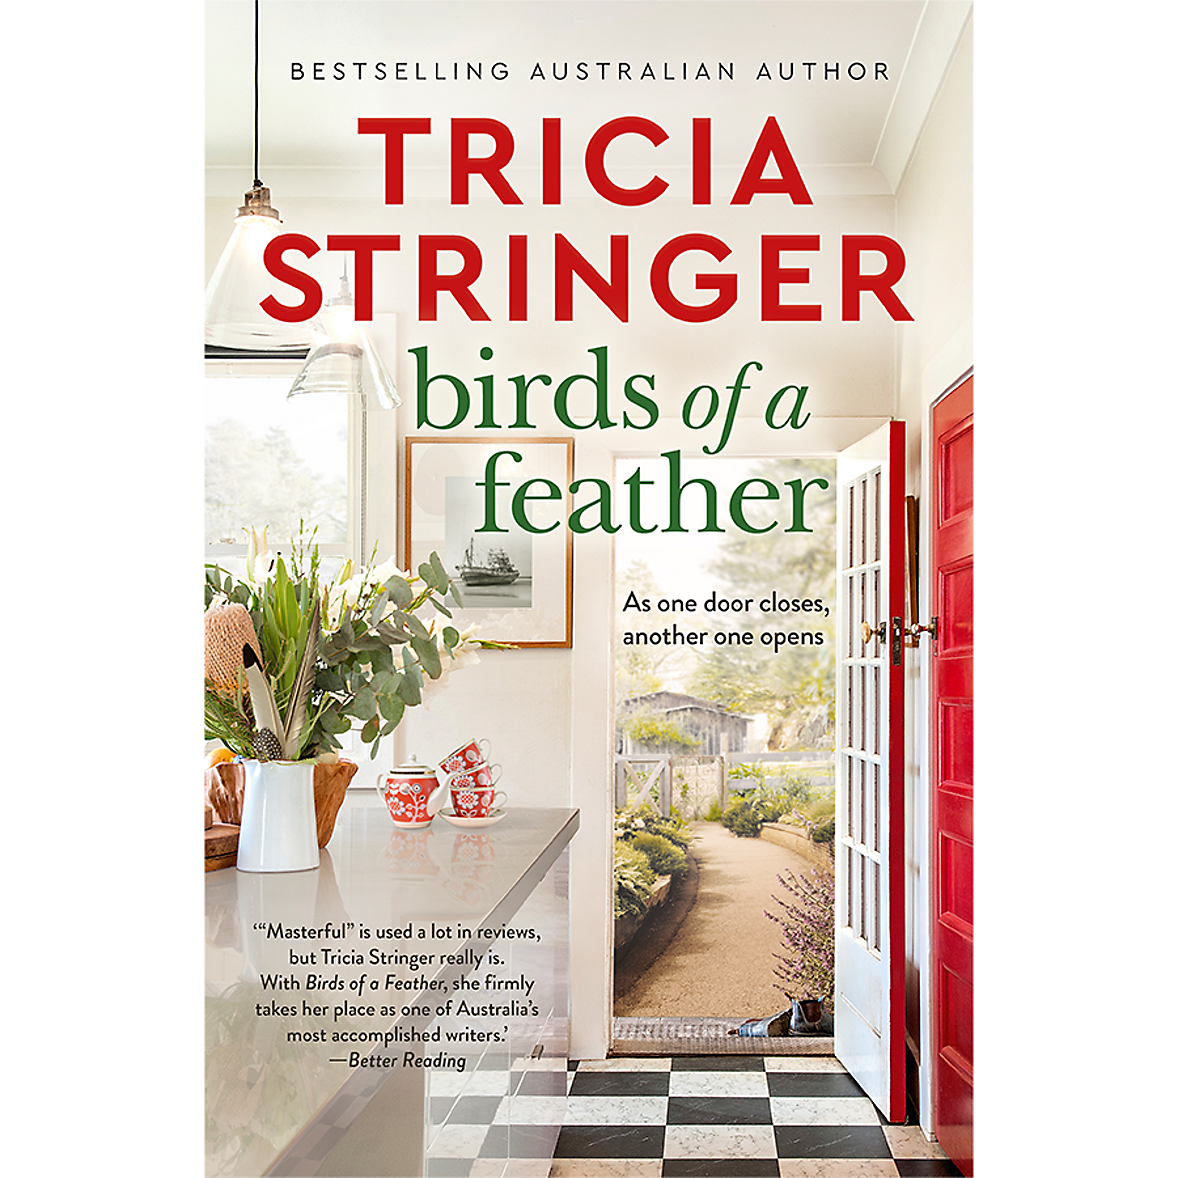 Birds of a Feather by Tricia Stringer